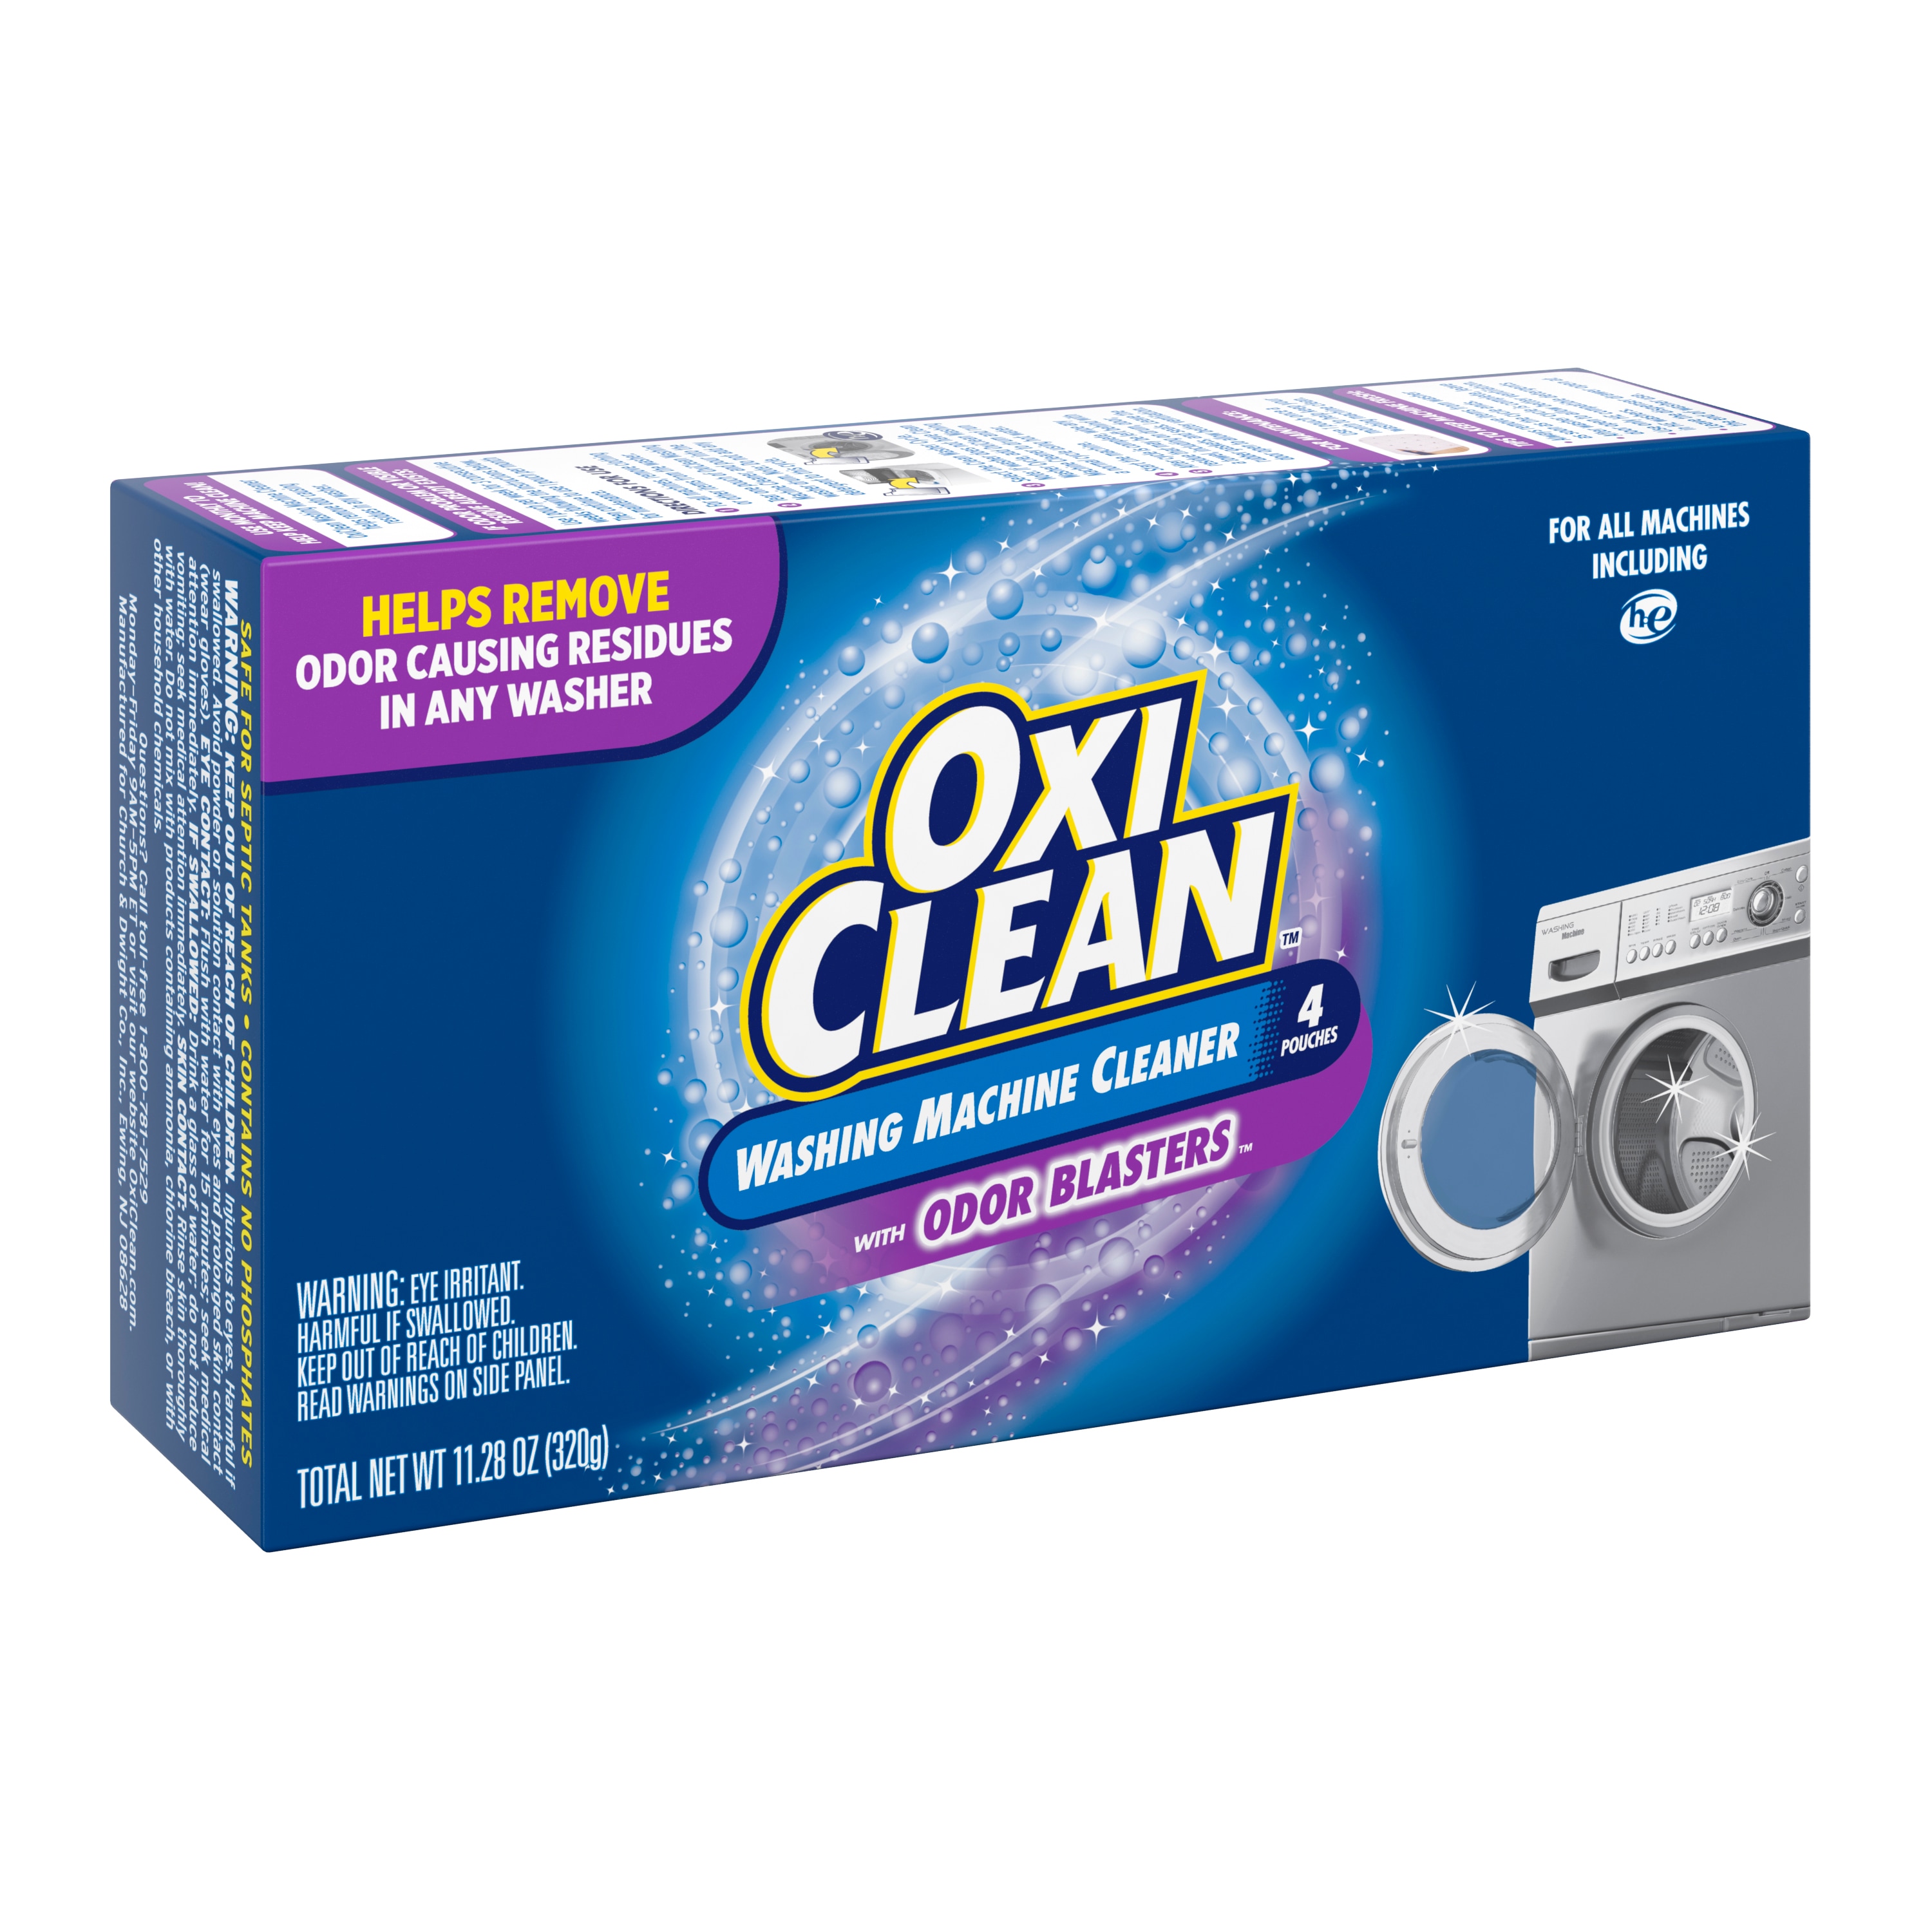 OXI CLEAN Total Interior Carpet and Upholstery Cleaner 19oz